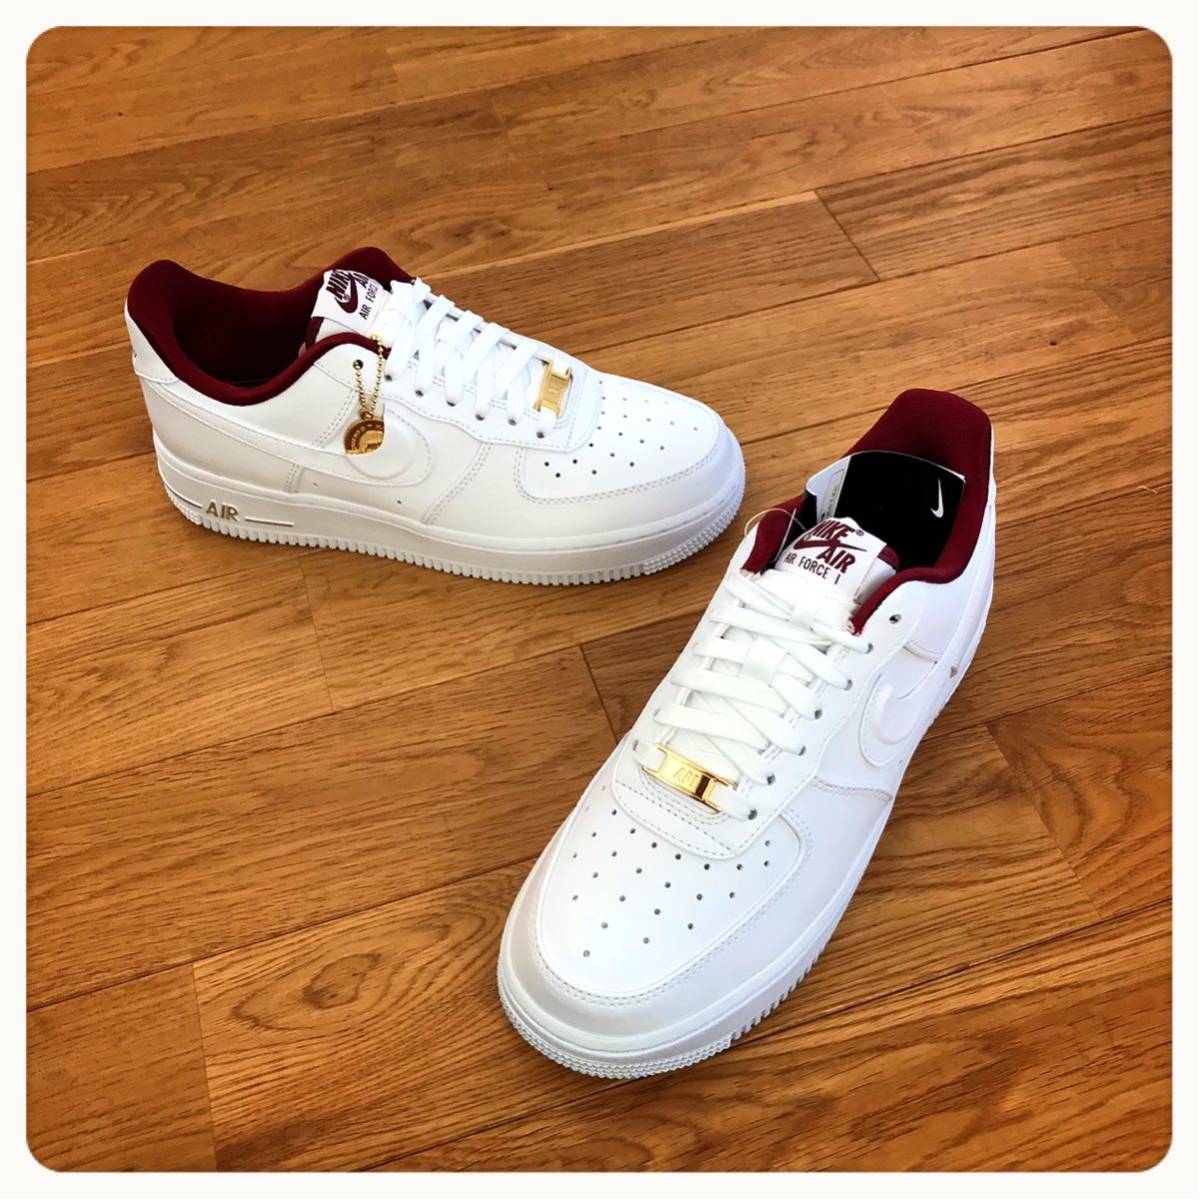 23 0cm Nike WMNS Air Force 1 Low '07 SE Just Do It DV7584-100 NIKE